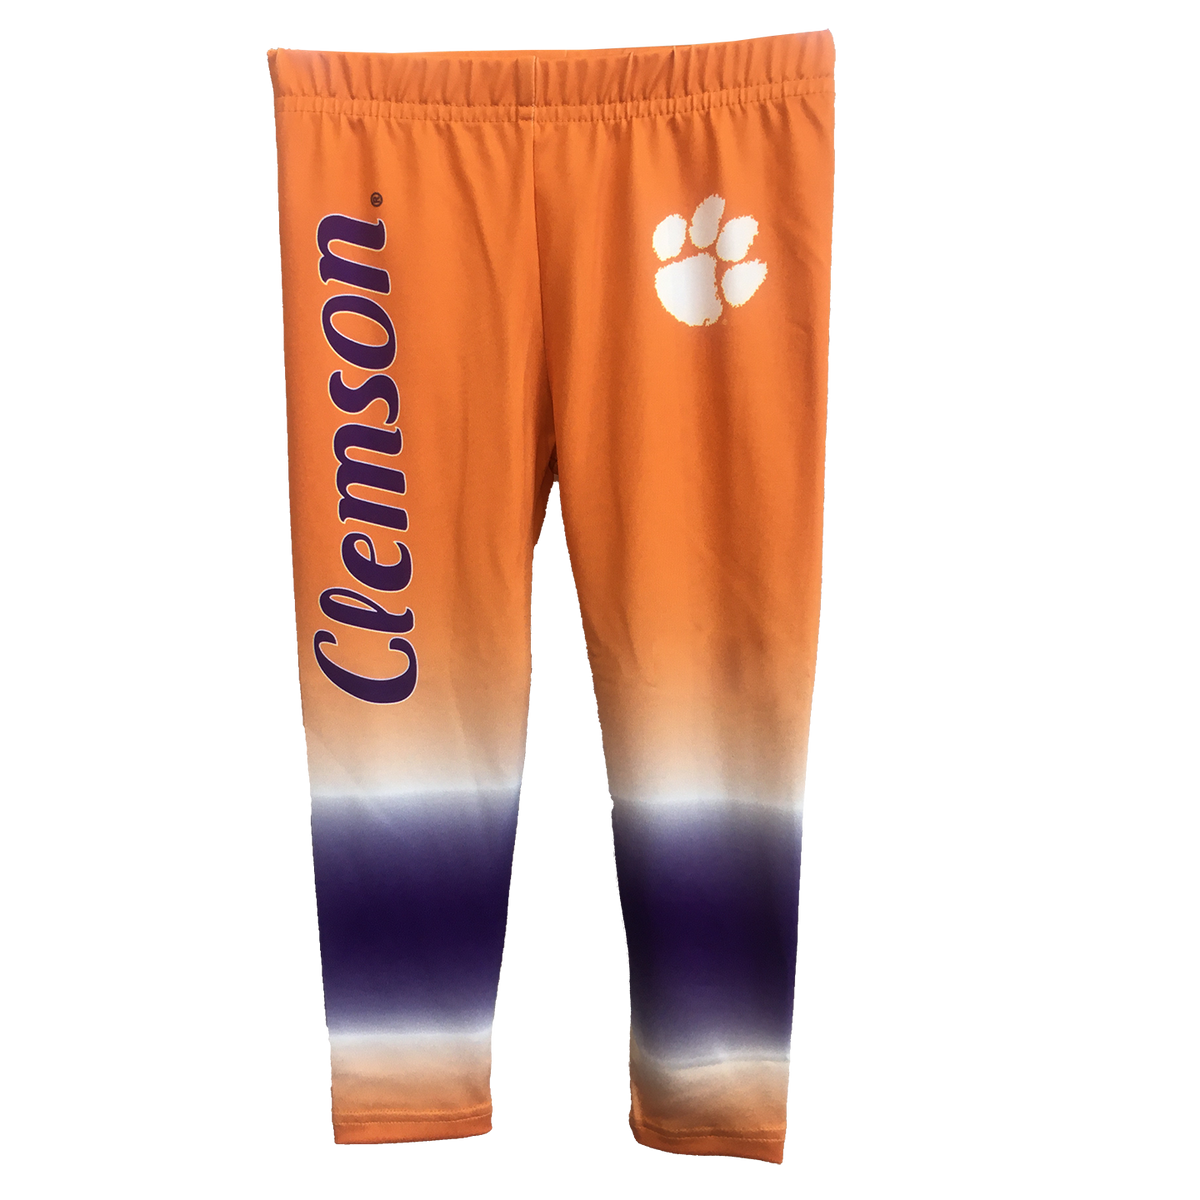 Clemson Tigers Leggings with Orange and Purple Tie-Dye and white Paw - Girls